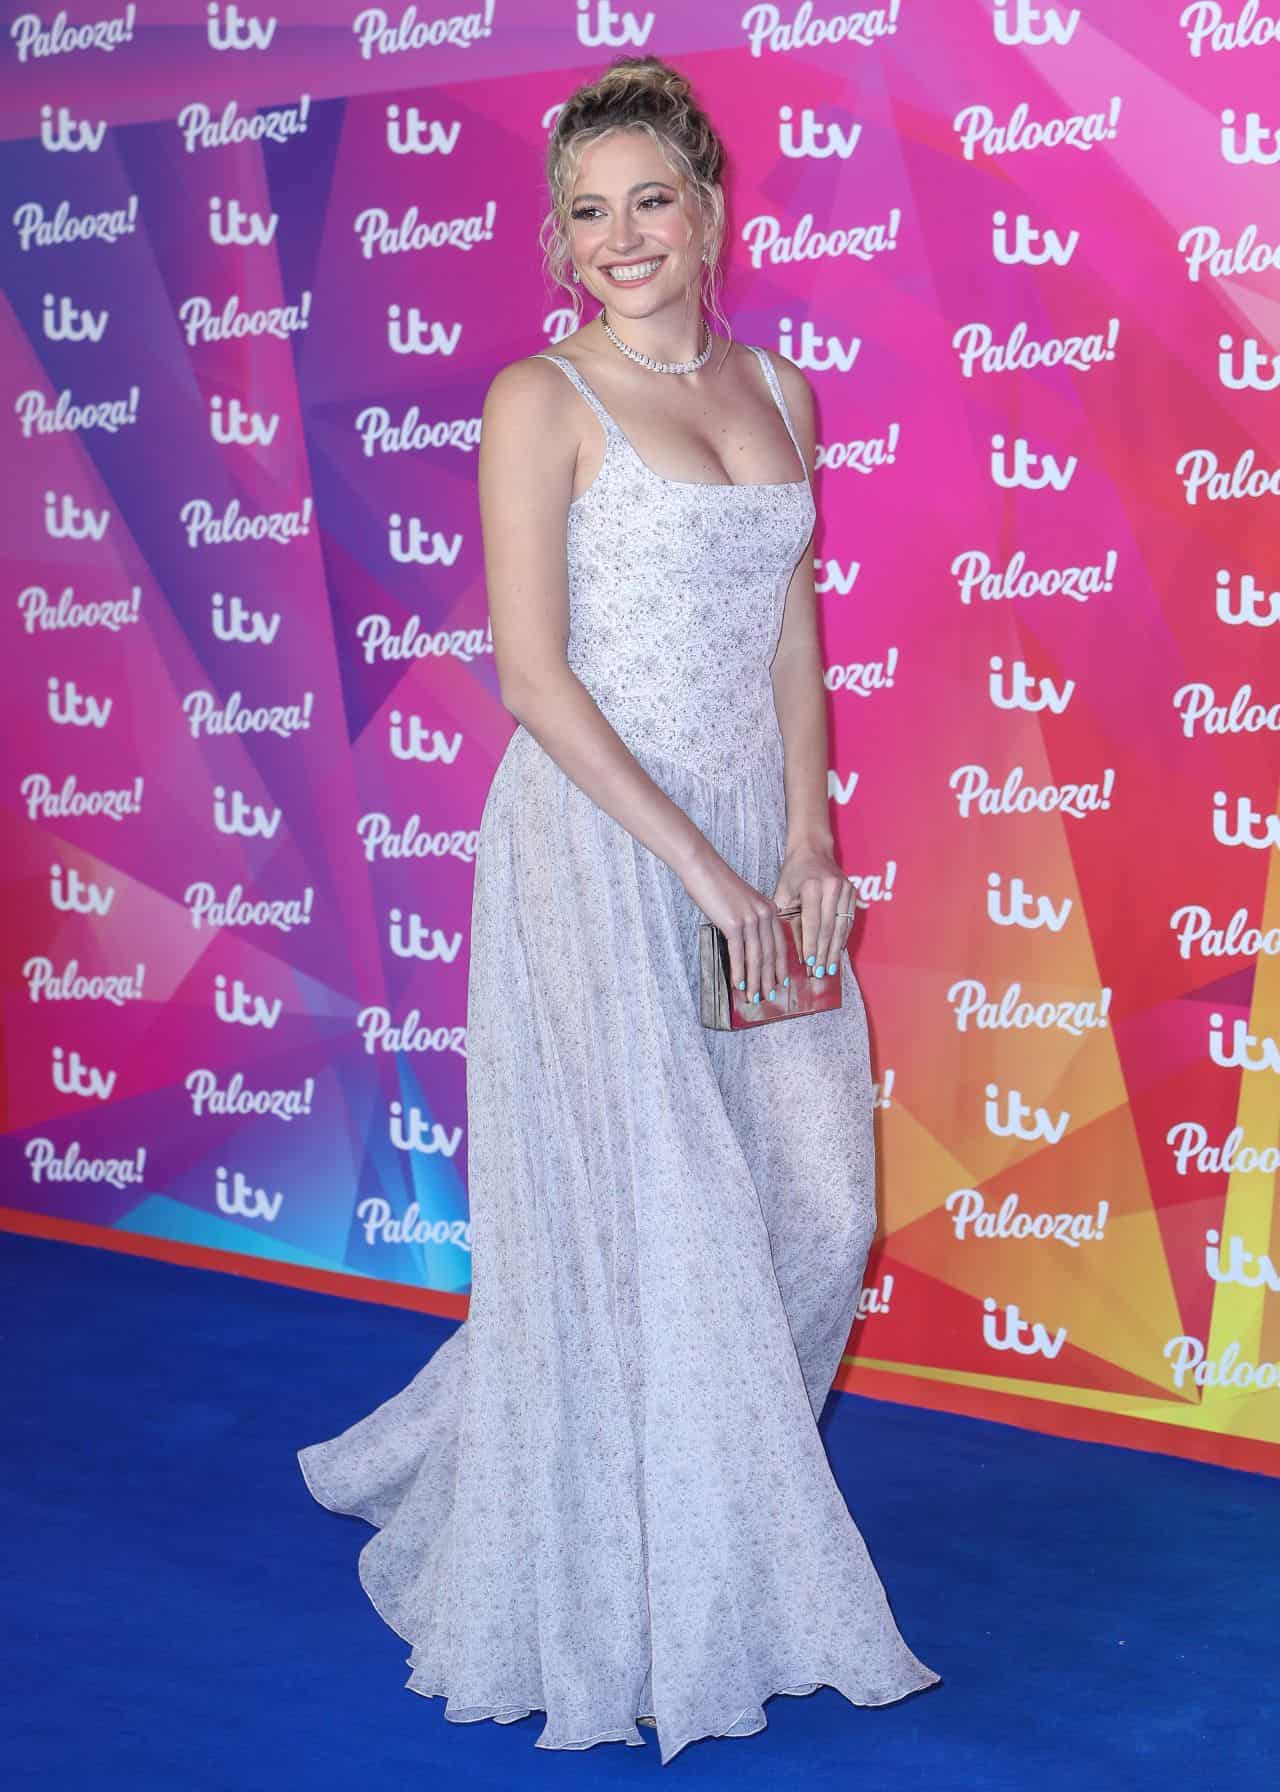 Pixie Lott Amazes in a Flowery Dress on the Red Carpet at the ITV Palooza